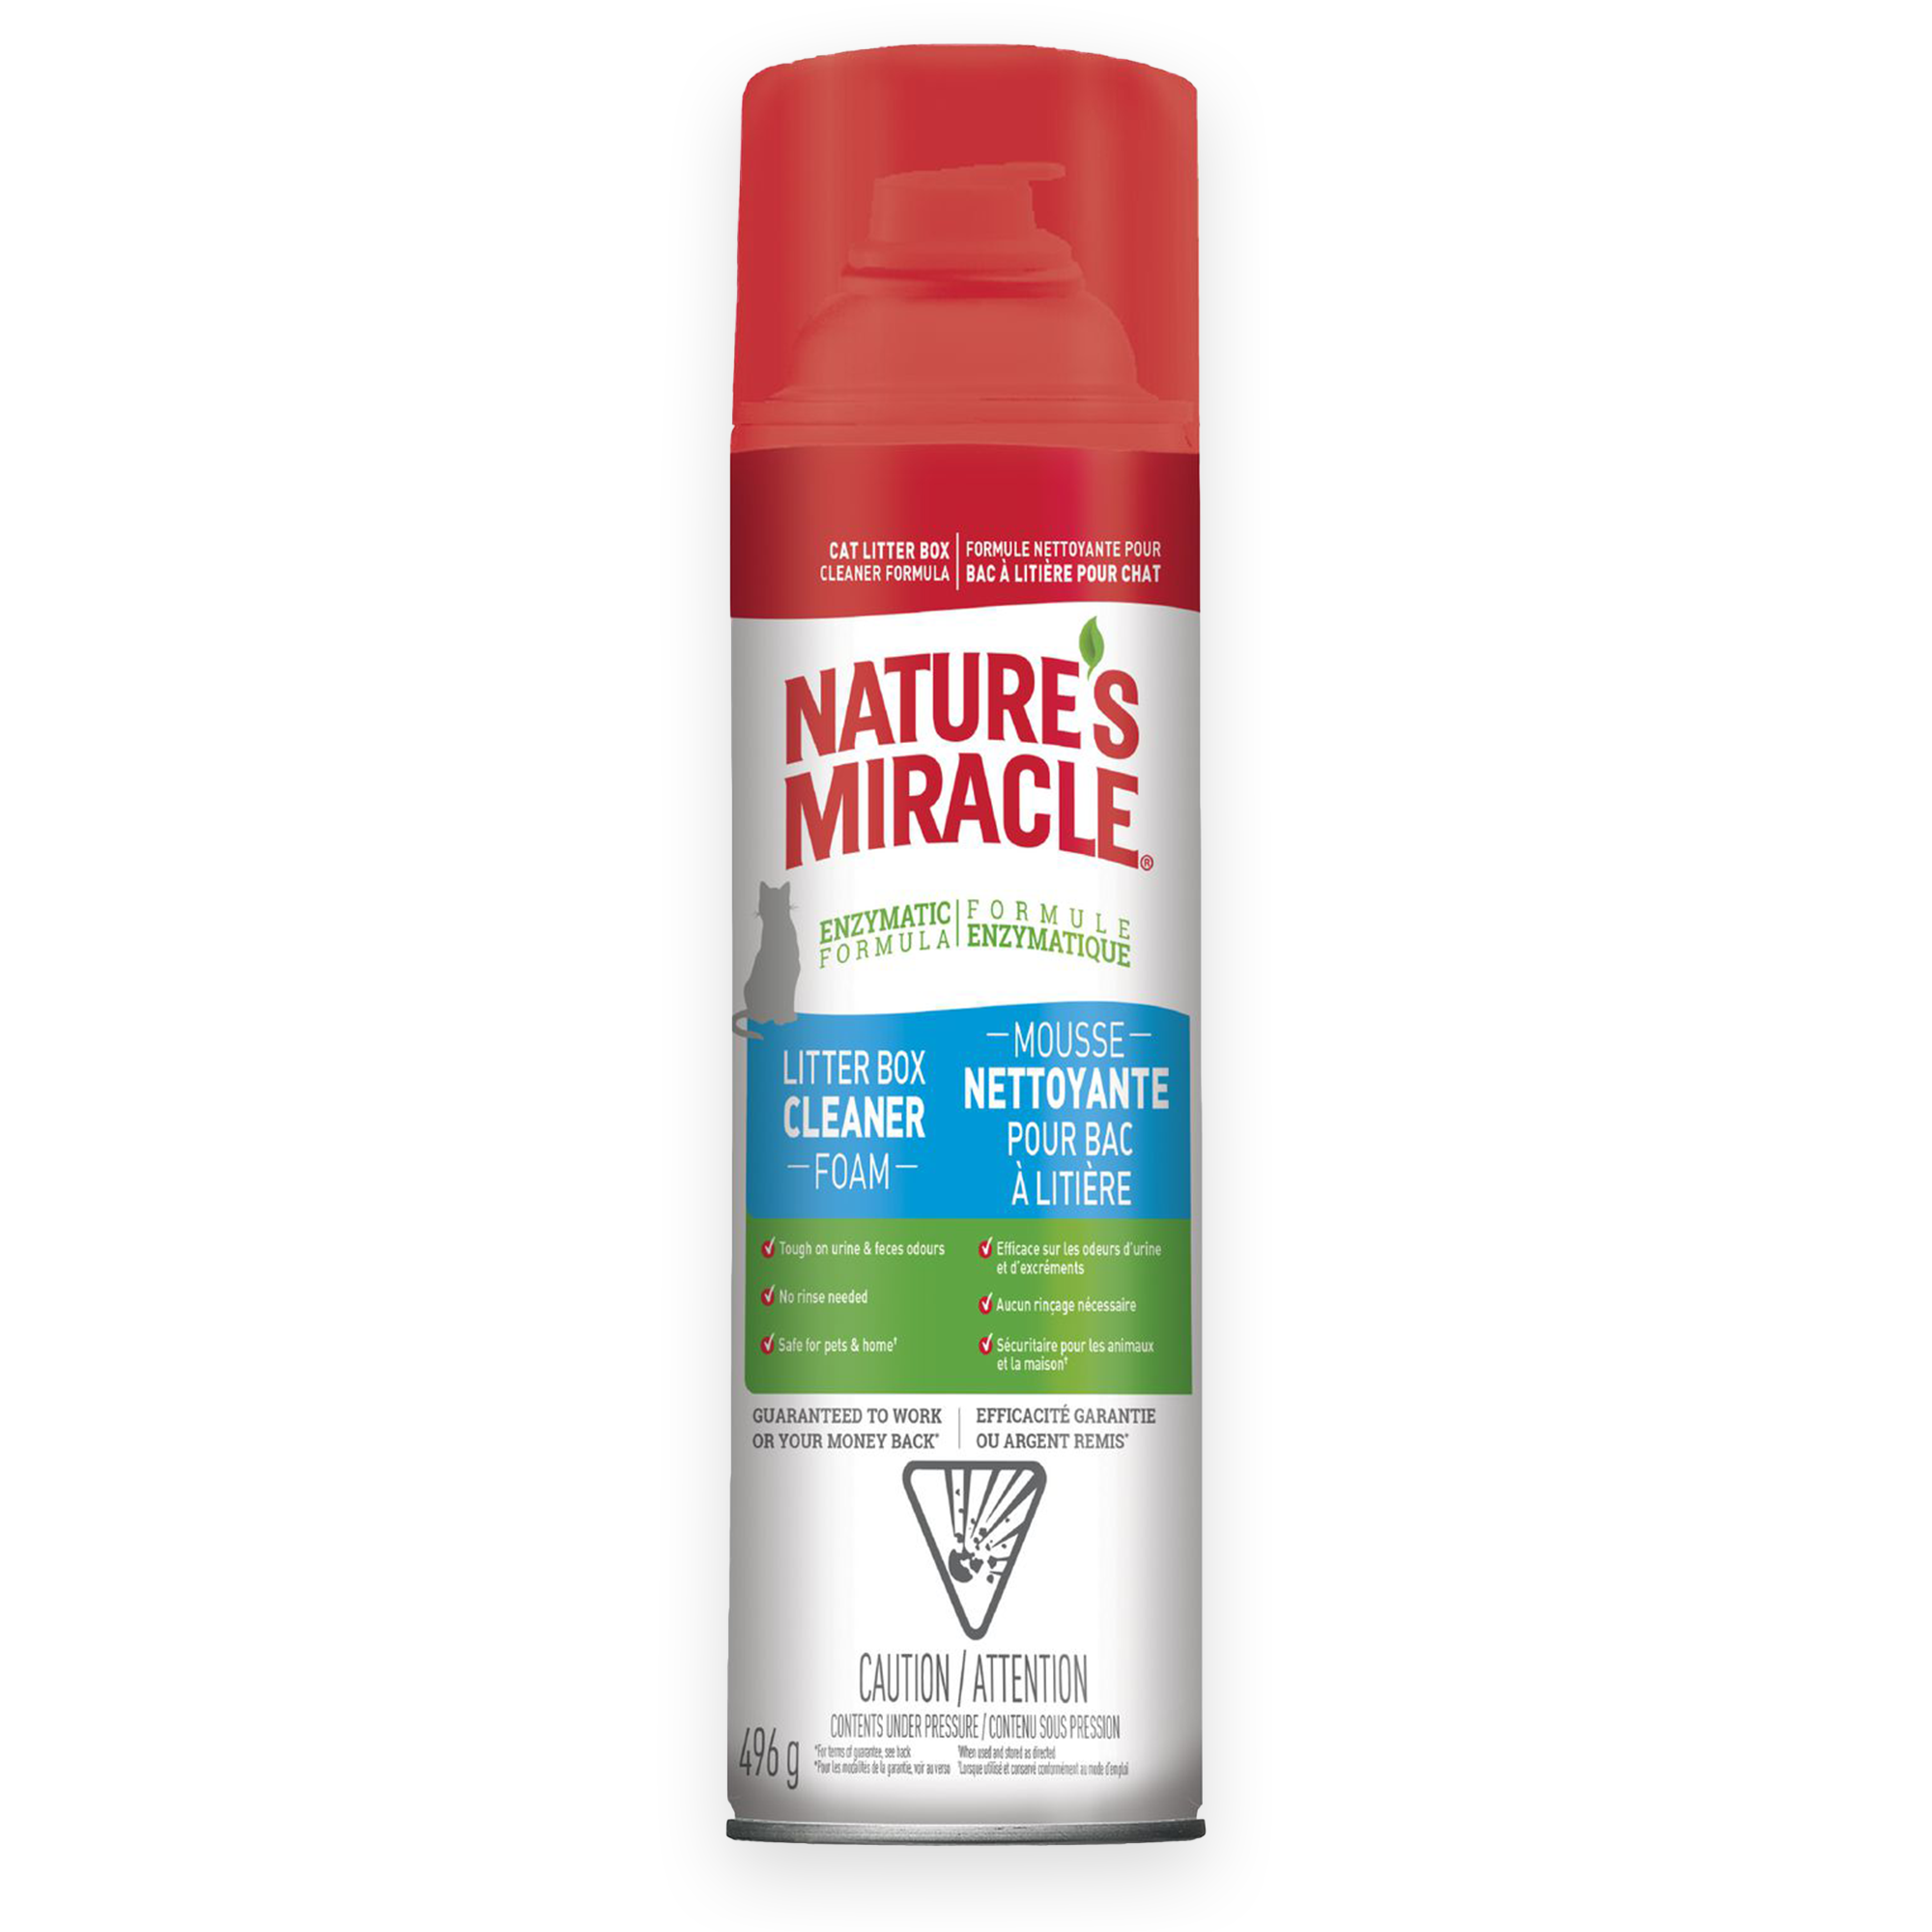 Nature's Miracle Litter Box Cleaning Foam for Urine & Fecal Odours (496g)